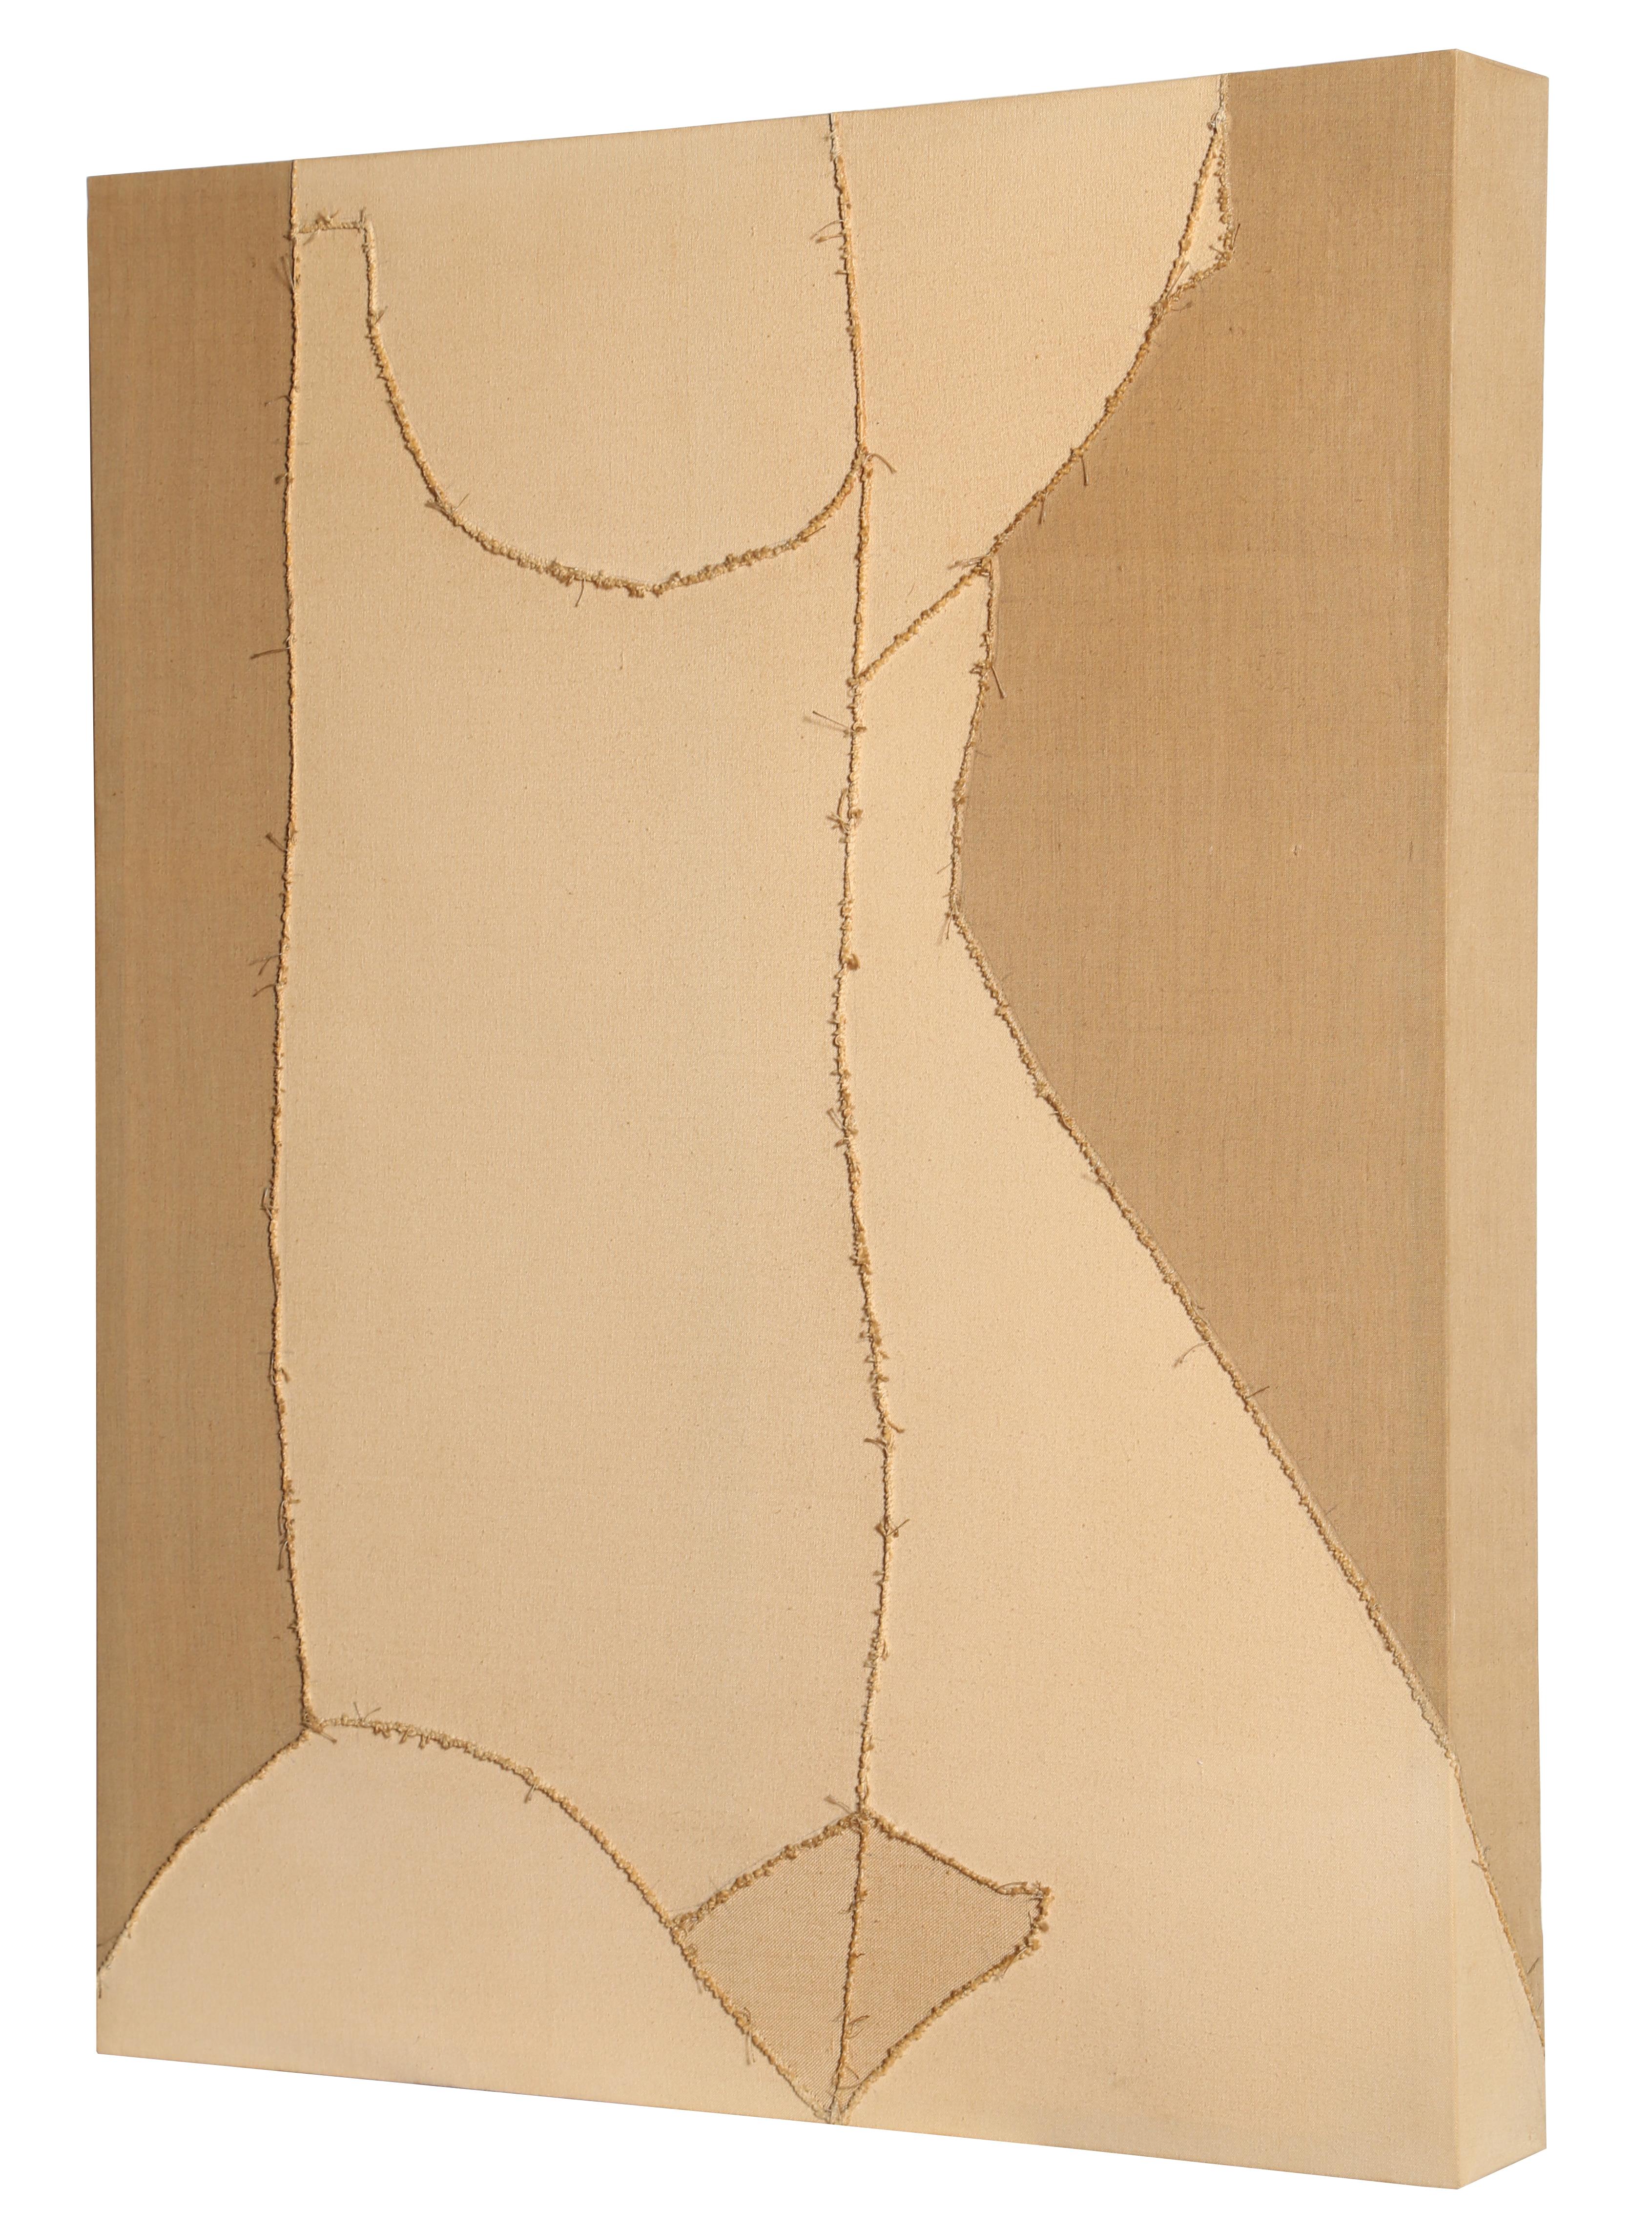 "Nude", 1974, Sewn Canvas by Lou Fink